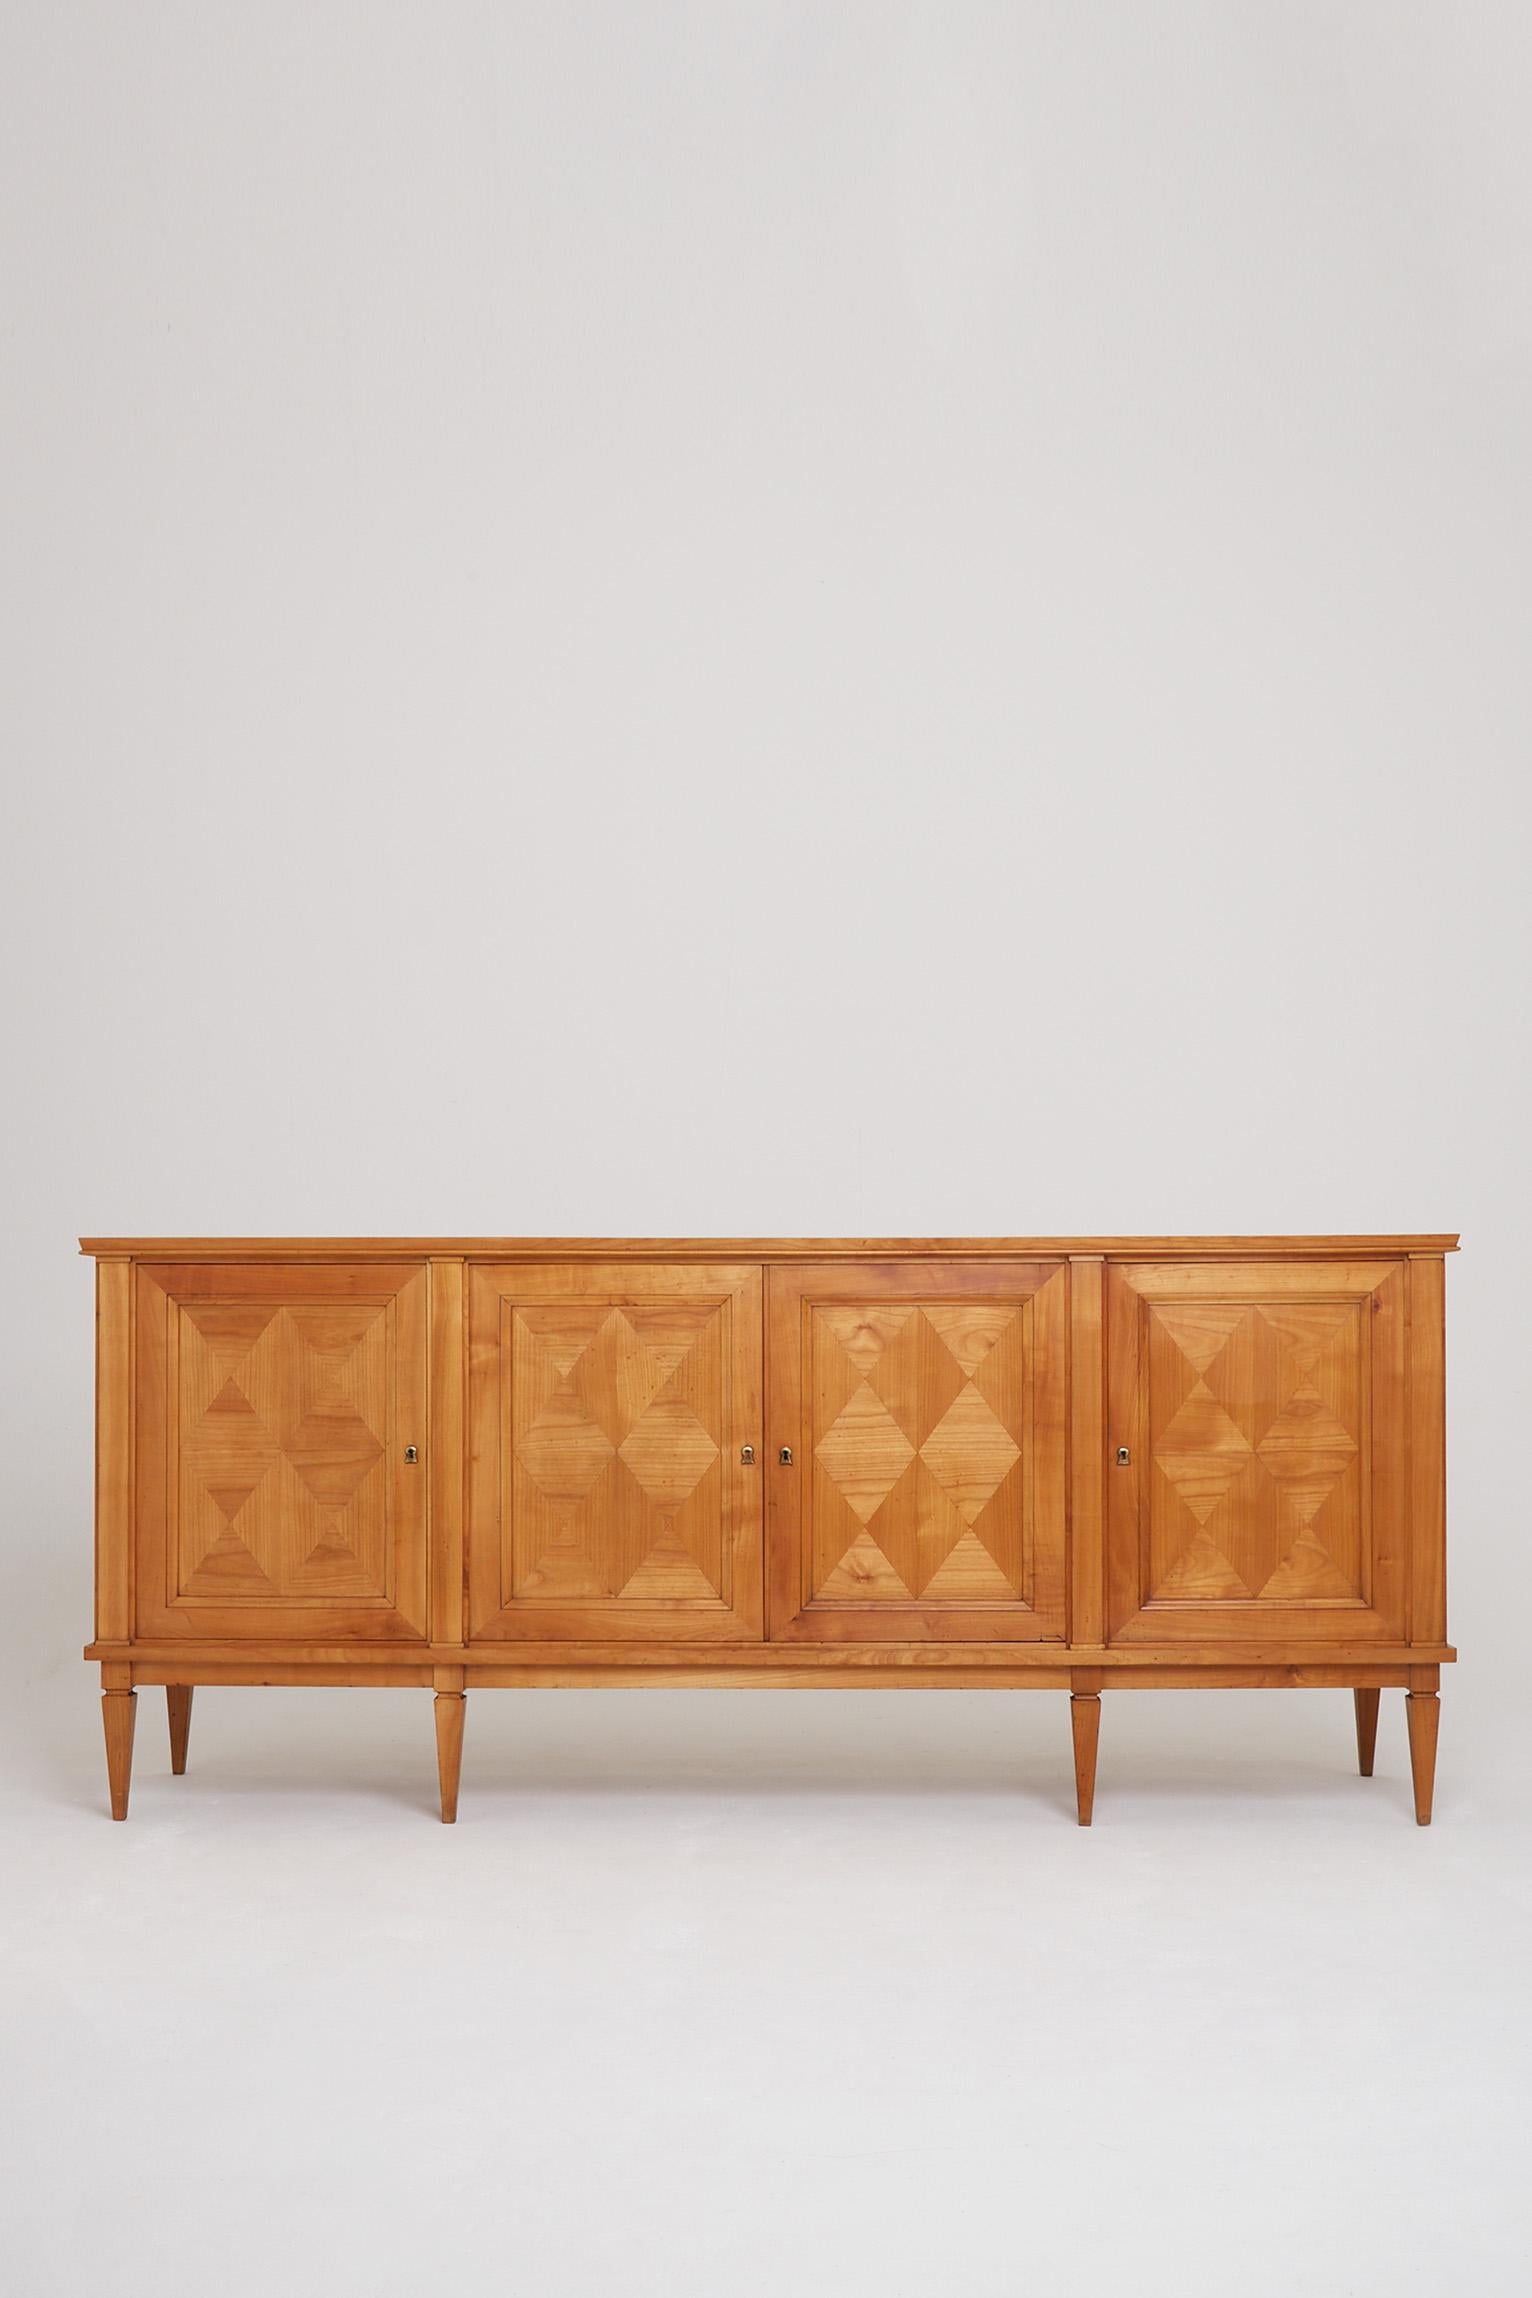 An Art Deco ash four door sideboard, with diamond shaped parquetry.
France, circa 1940.